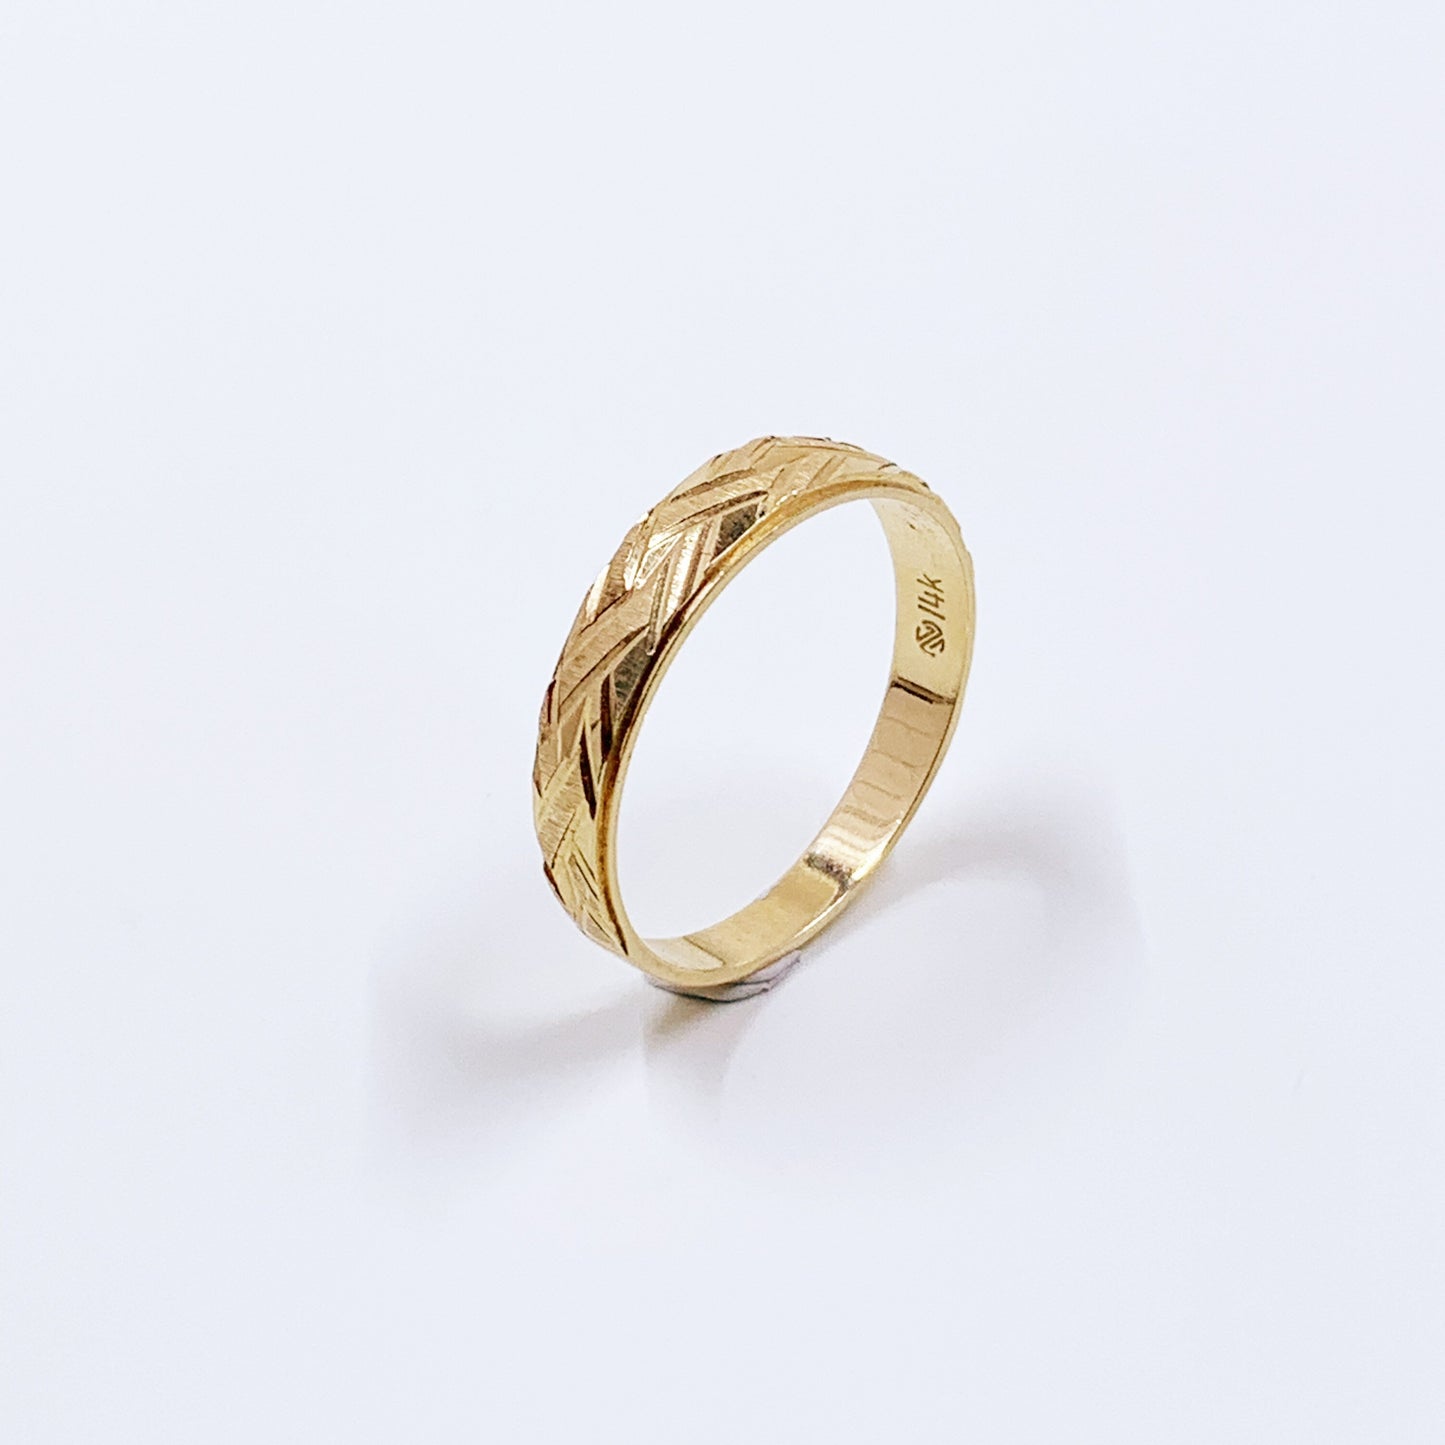 Estate 14K Gold Etched Weave Ring | 14K Gold Textured Ring | Size 9.75 Ring